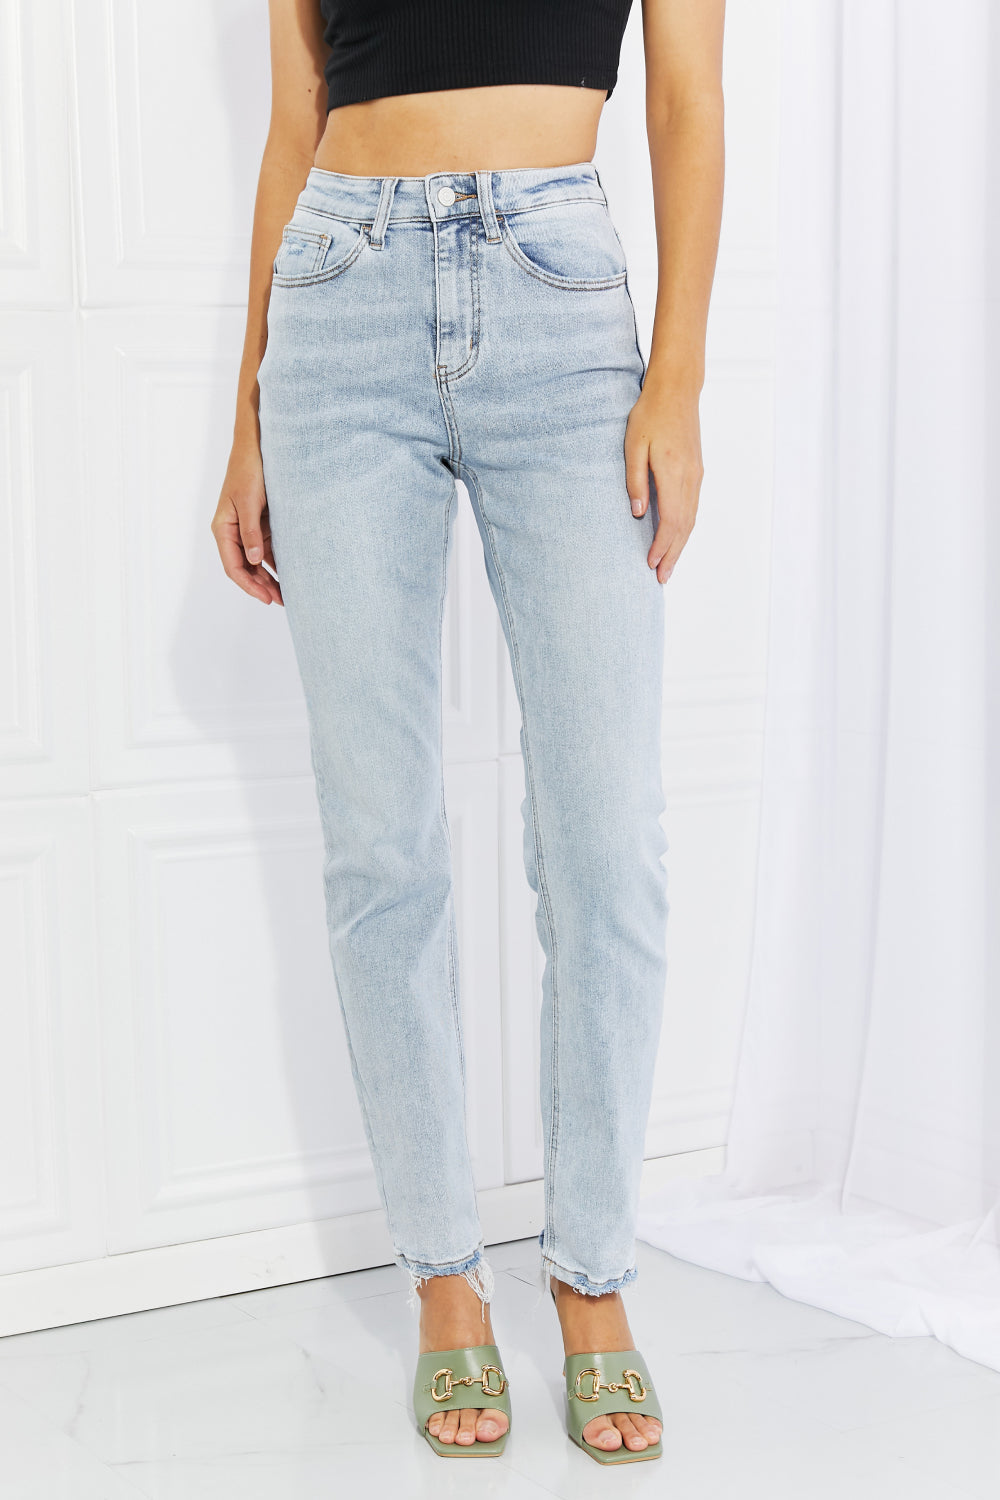 Lovervet Raw Hem High-Waisted Jeans-The Bee Chic Boutique-Light-24-[option4]-[option5]-[option6]-[option7]-[option8]-Shop-Boutique-Clothing-for-Women-Online